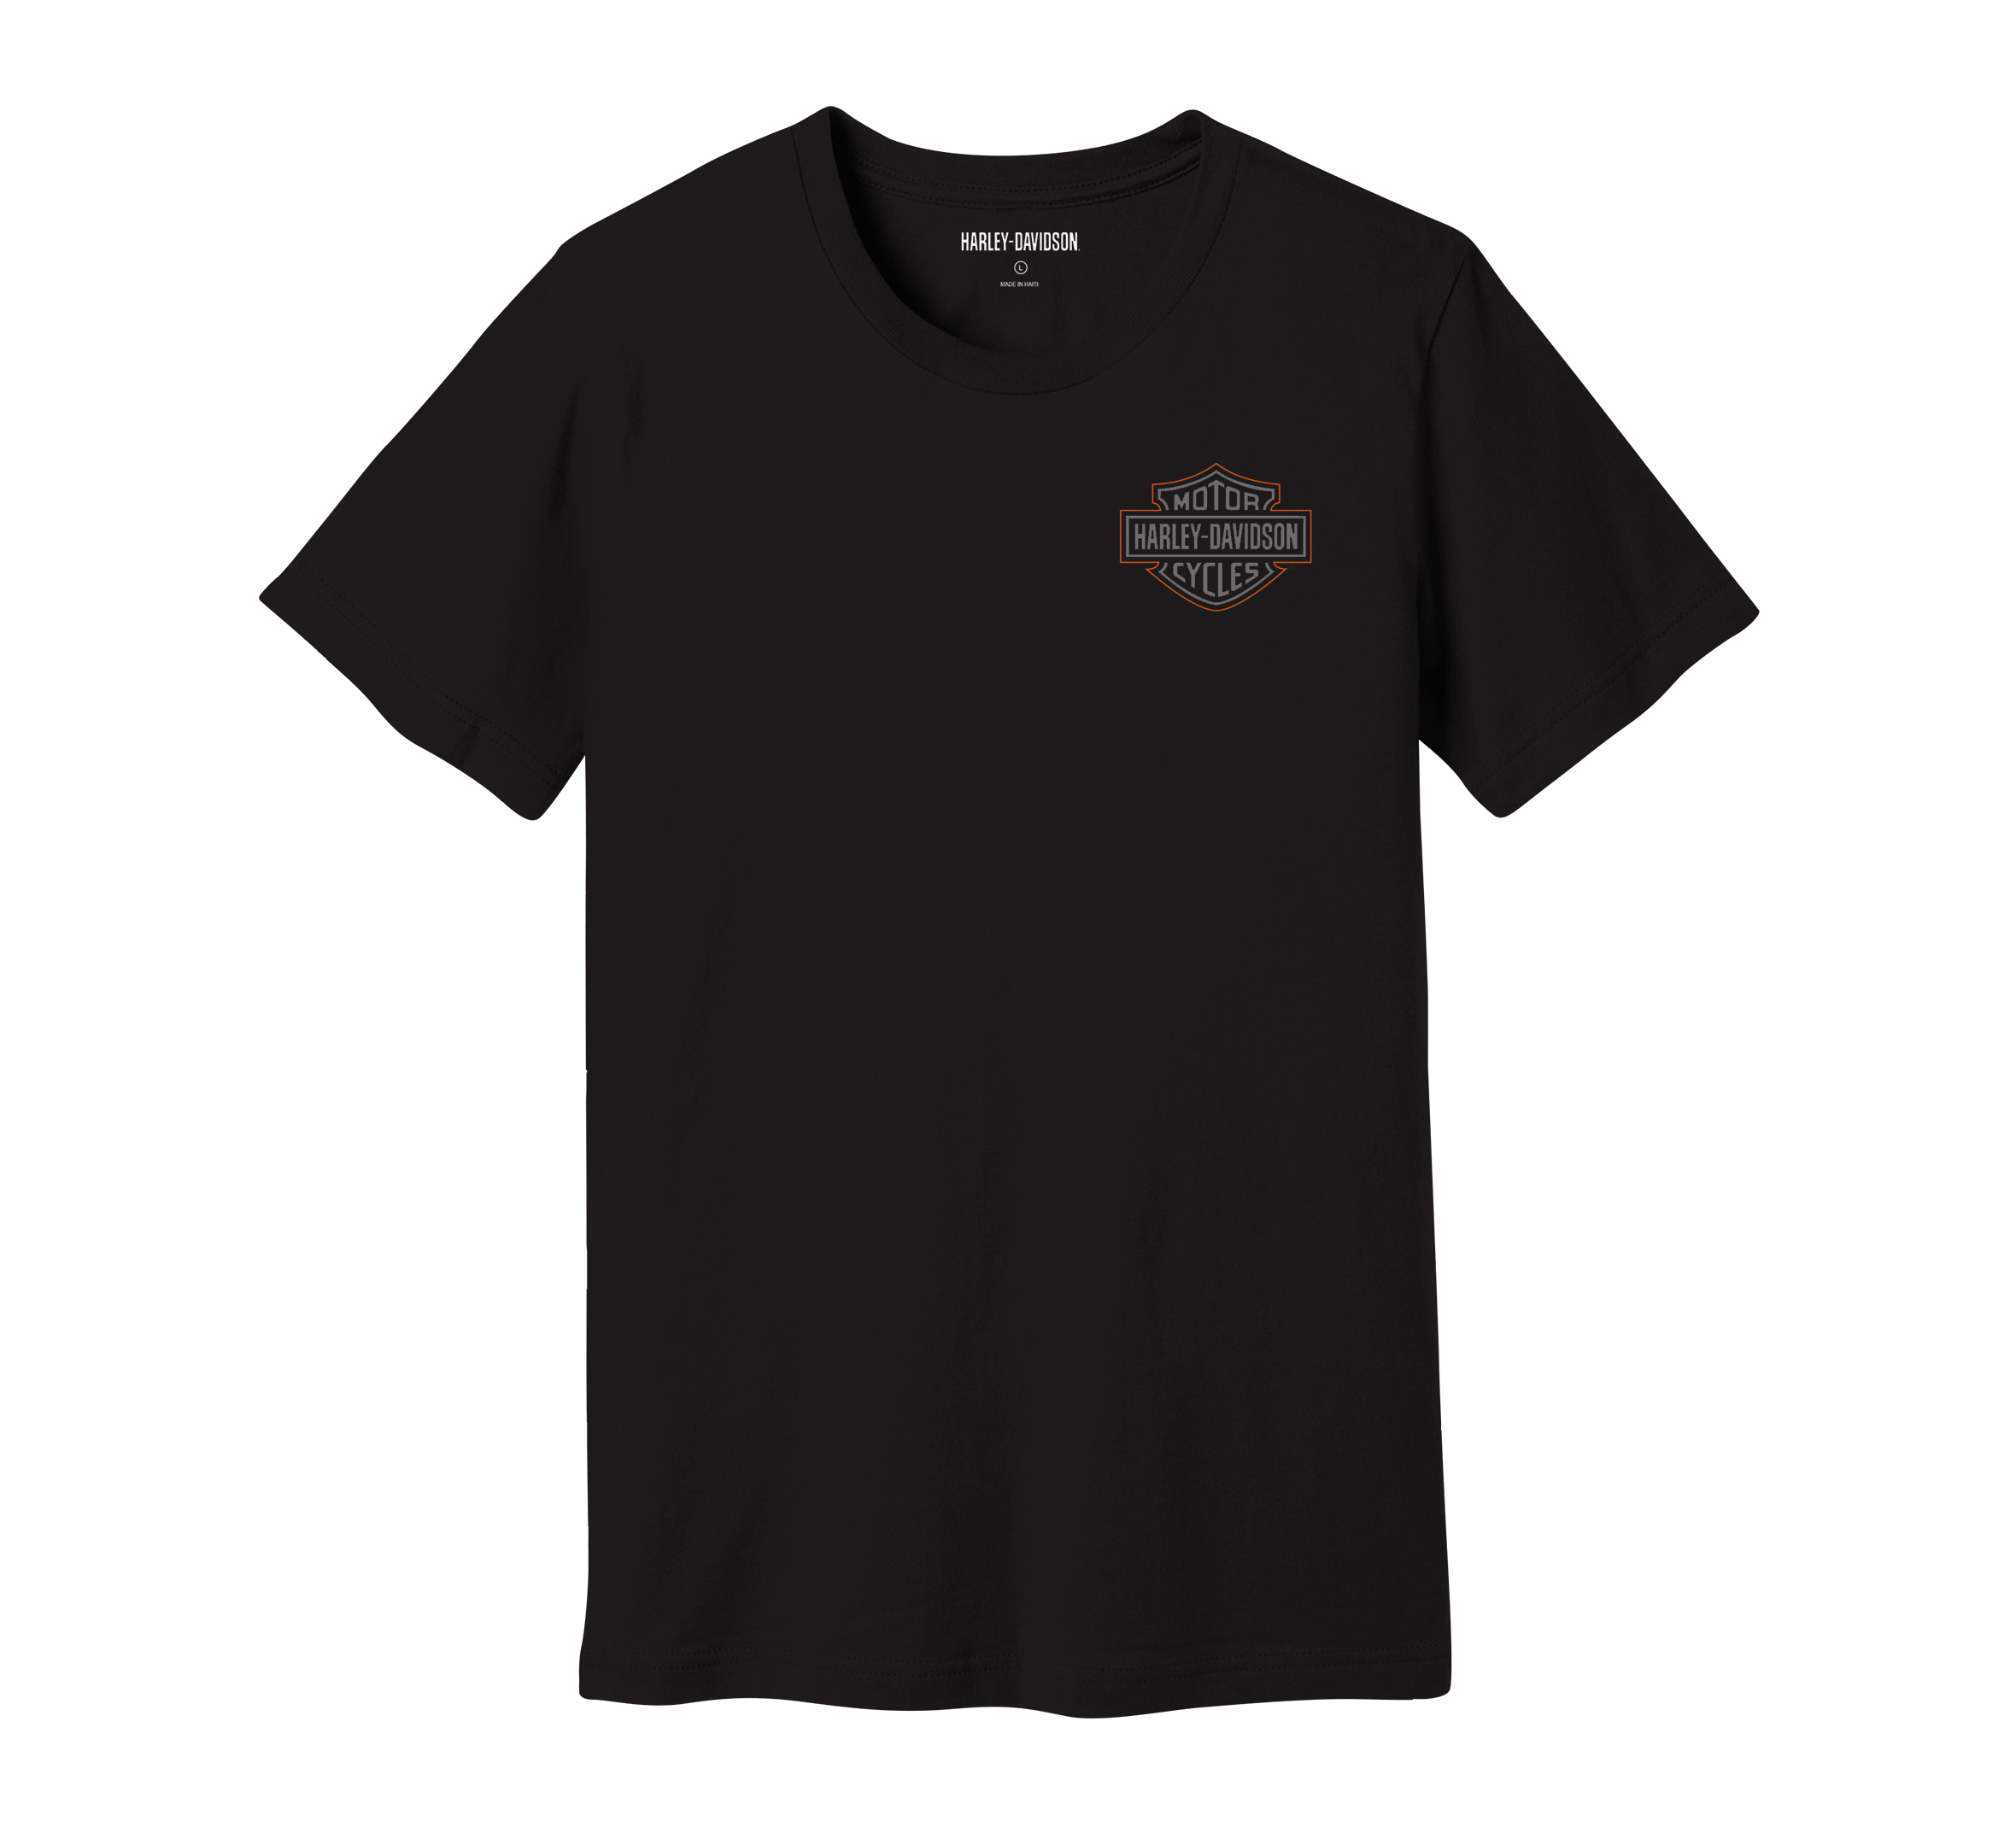 Men's Harley-Davidson Wounded Warrior Project Back Graphic Tee | Harley ...